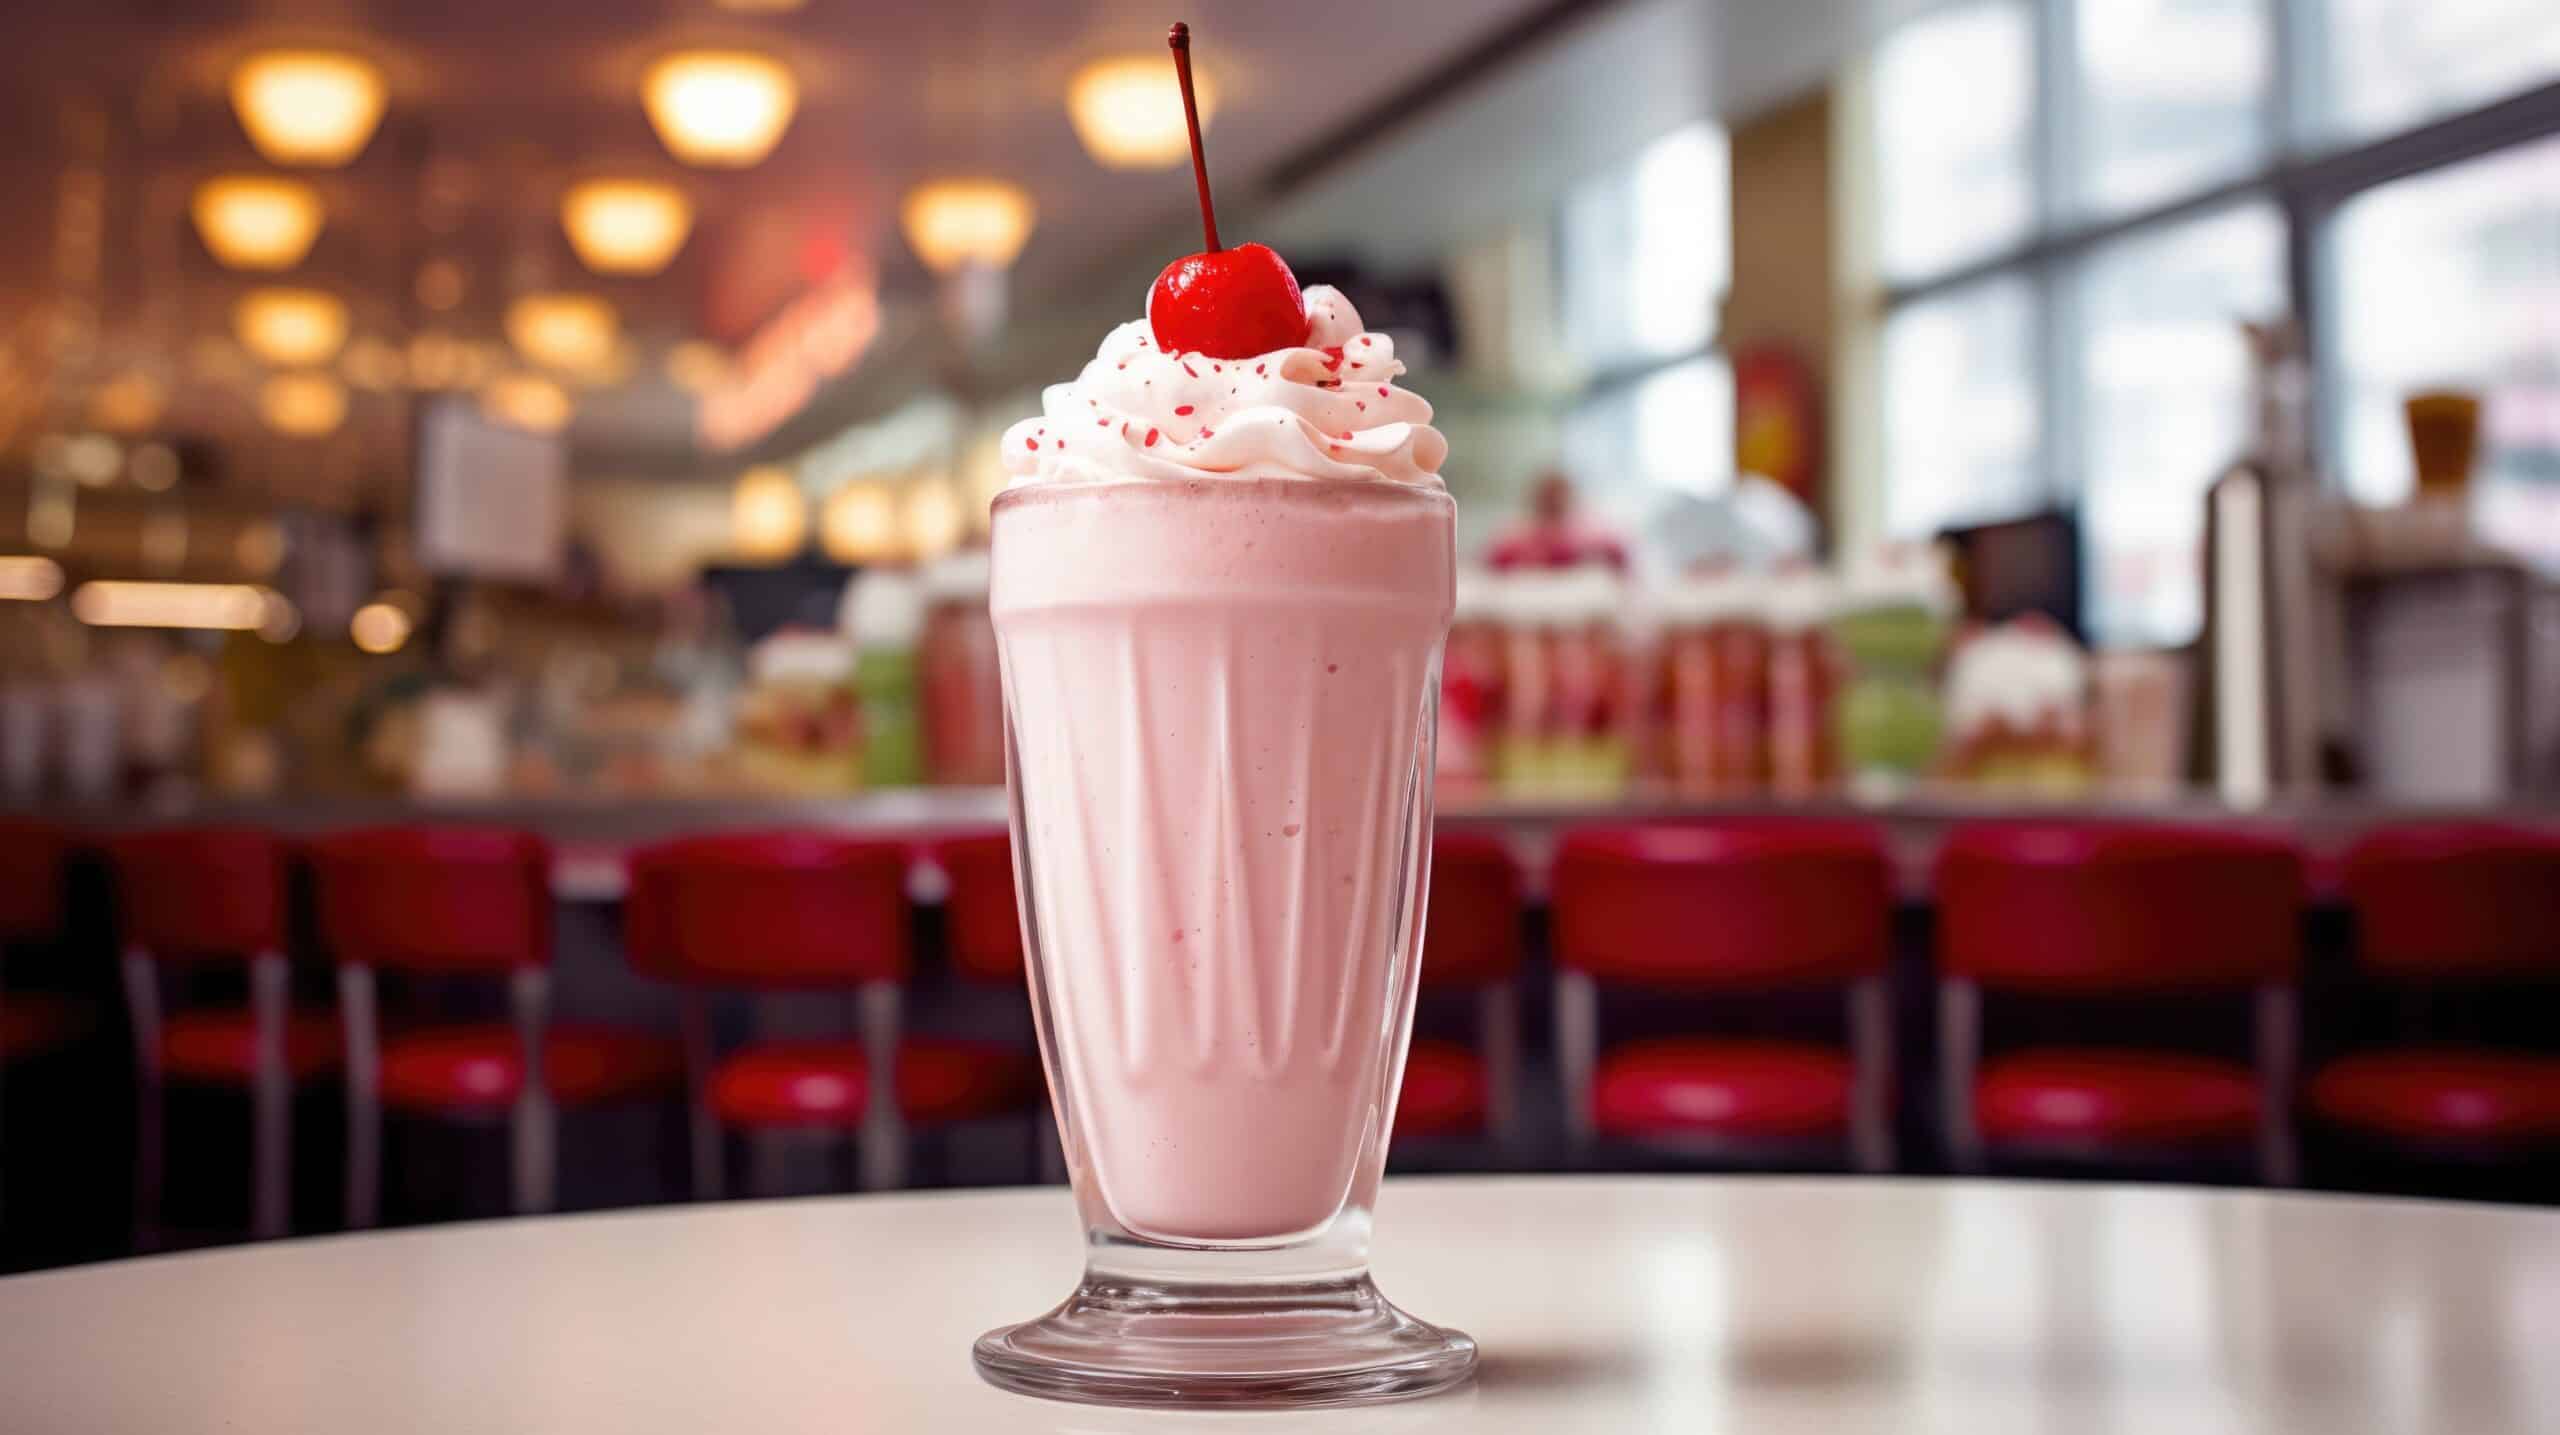 Strawberry milkshake on a table with an old time diner in the background.